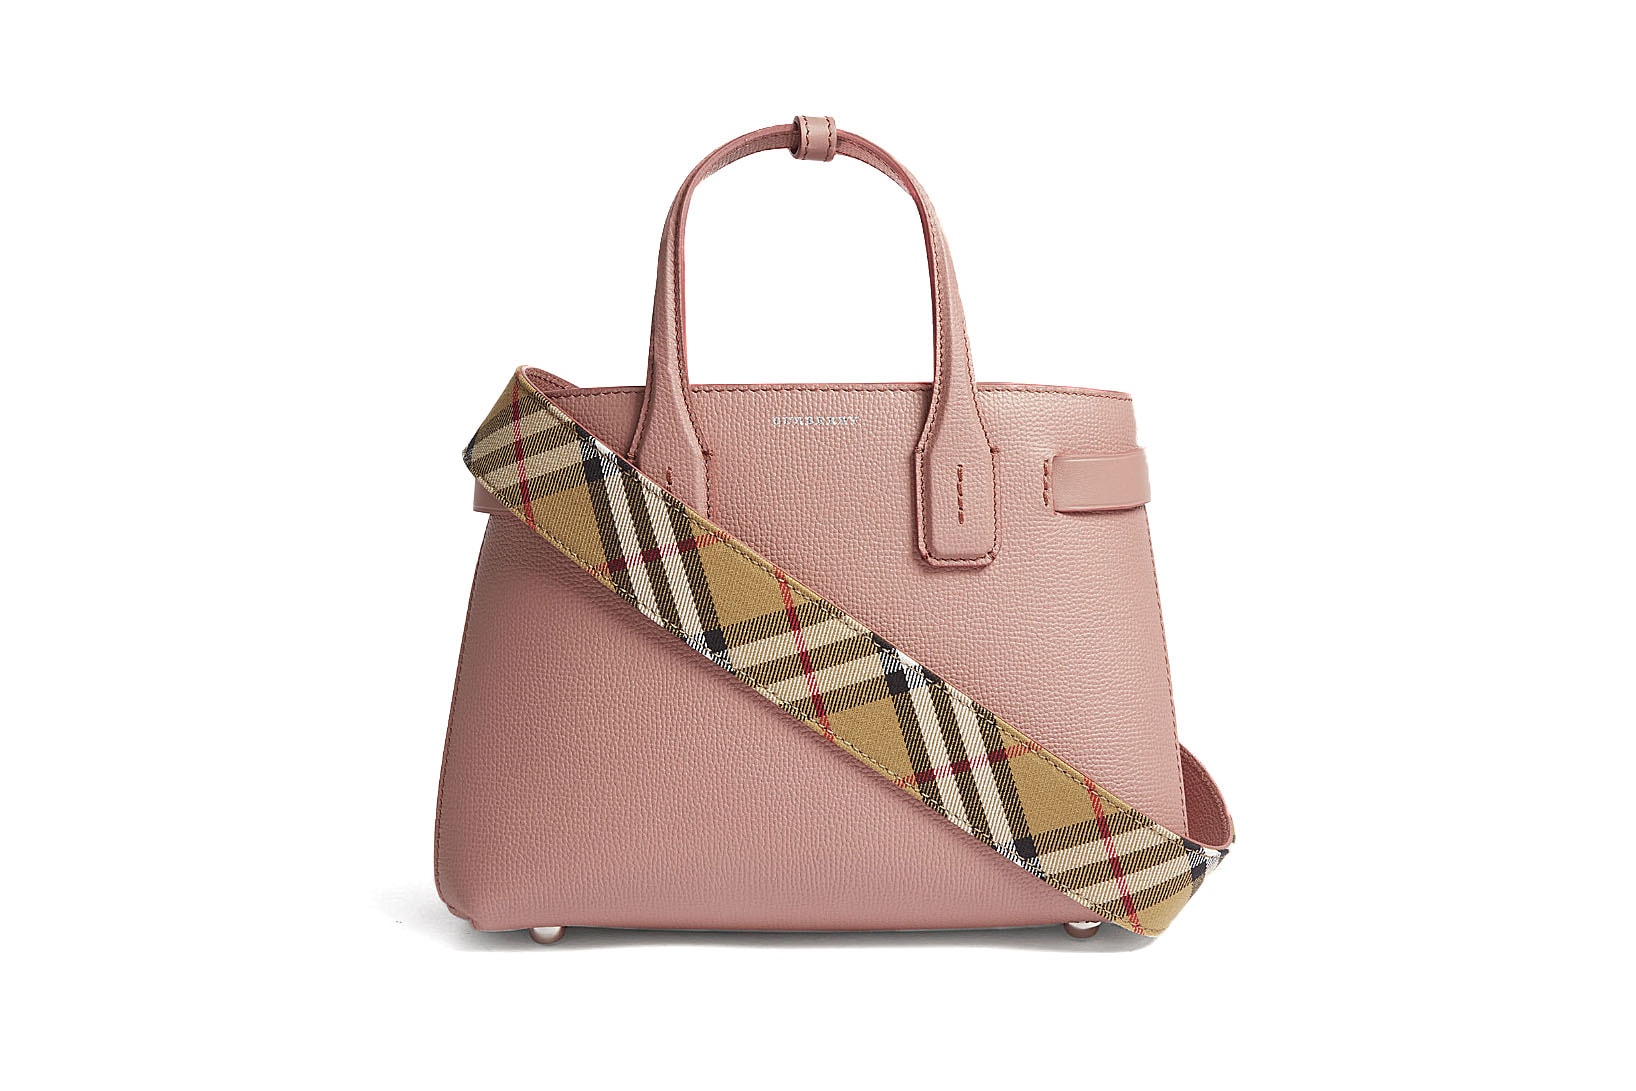 Burberry Dusty Rose Pink New Banner Grained Leather Tote Bag